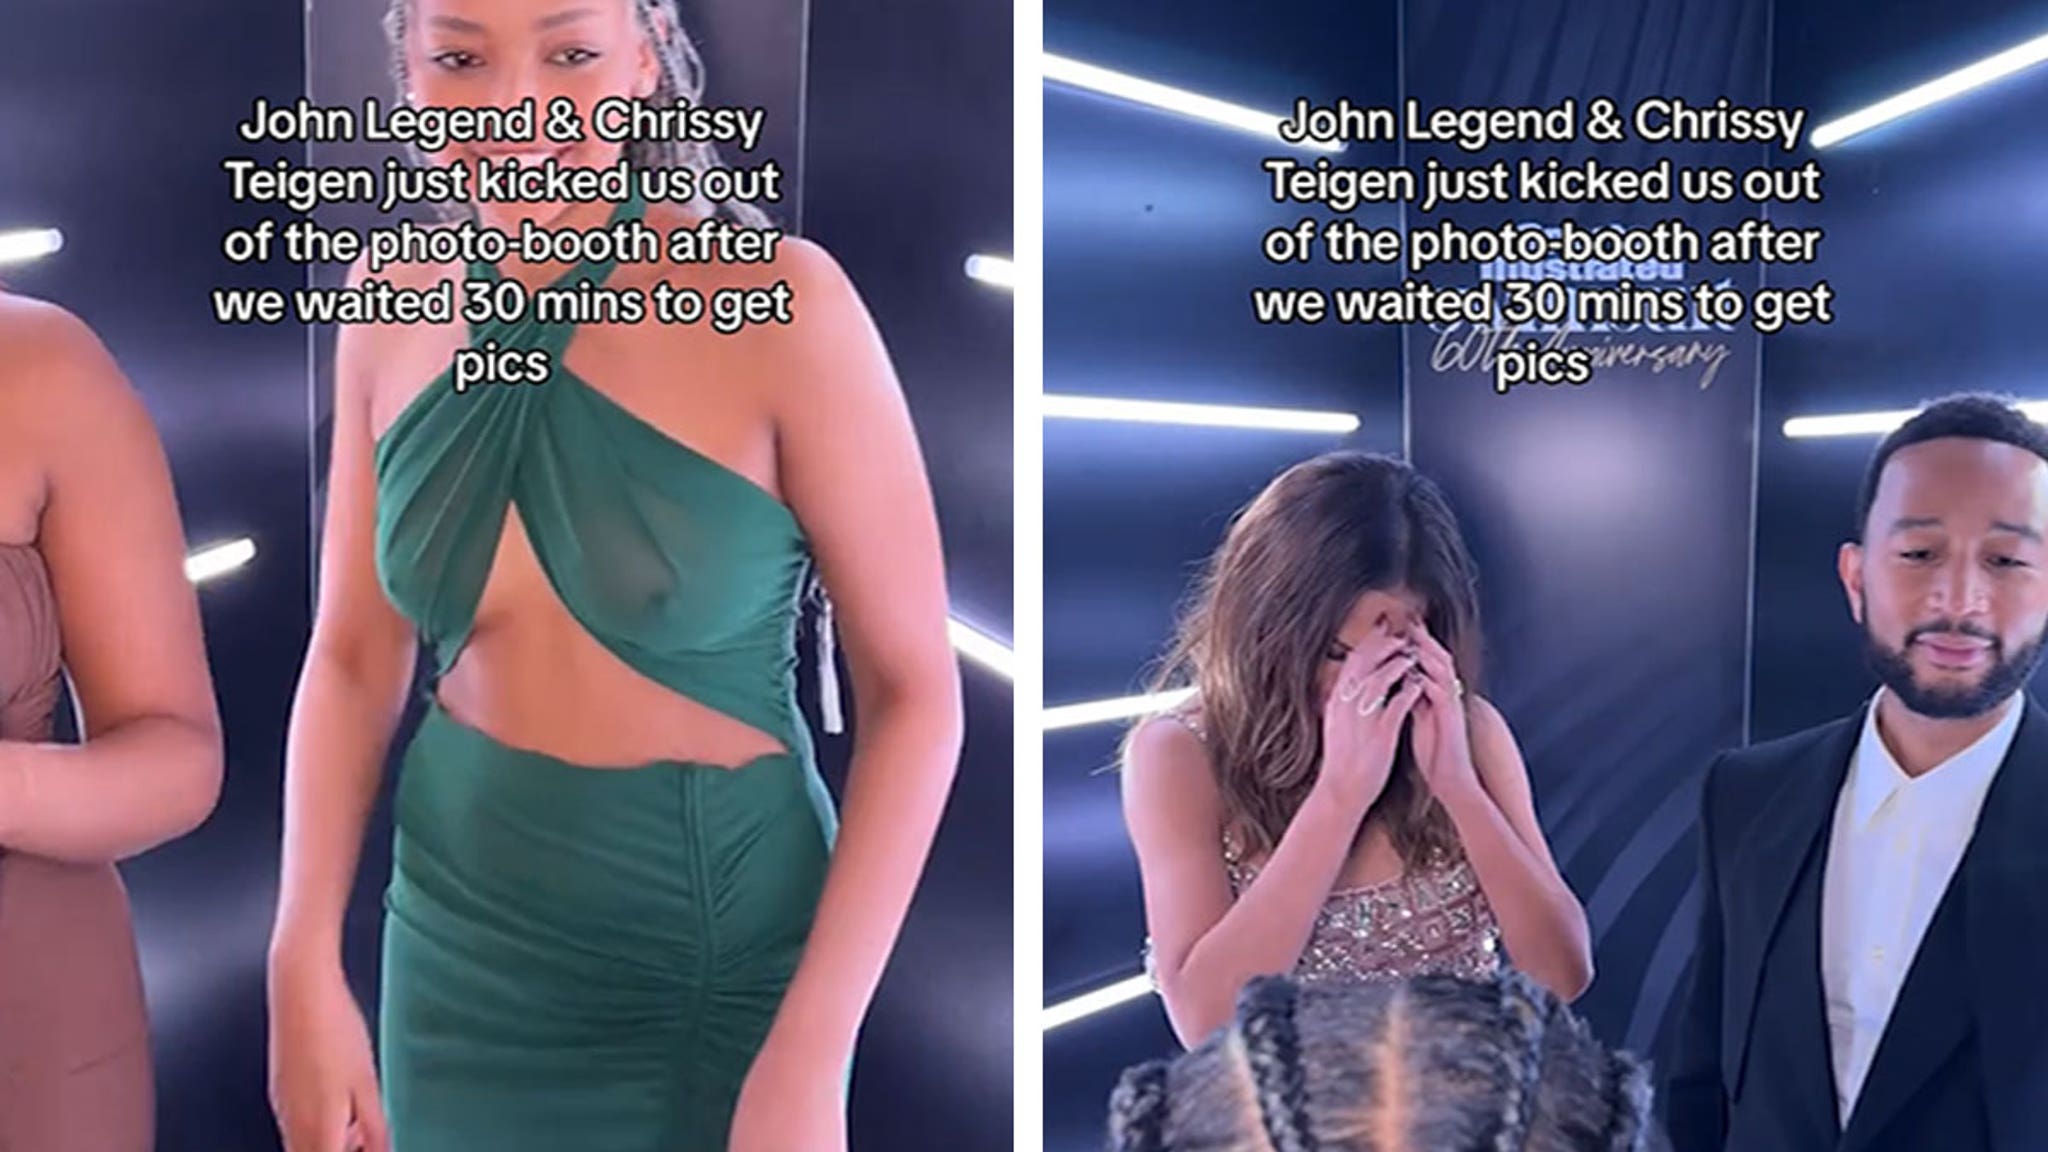 TikToker claims Chrissy Teigen and John Legend kicked group out of photo booth